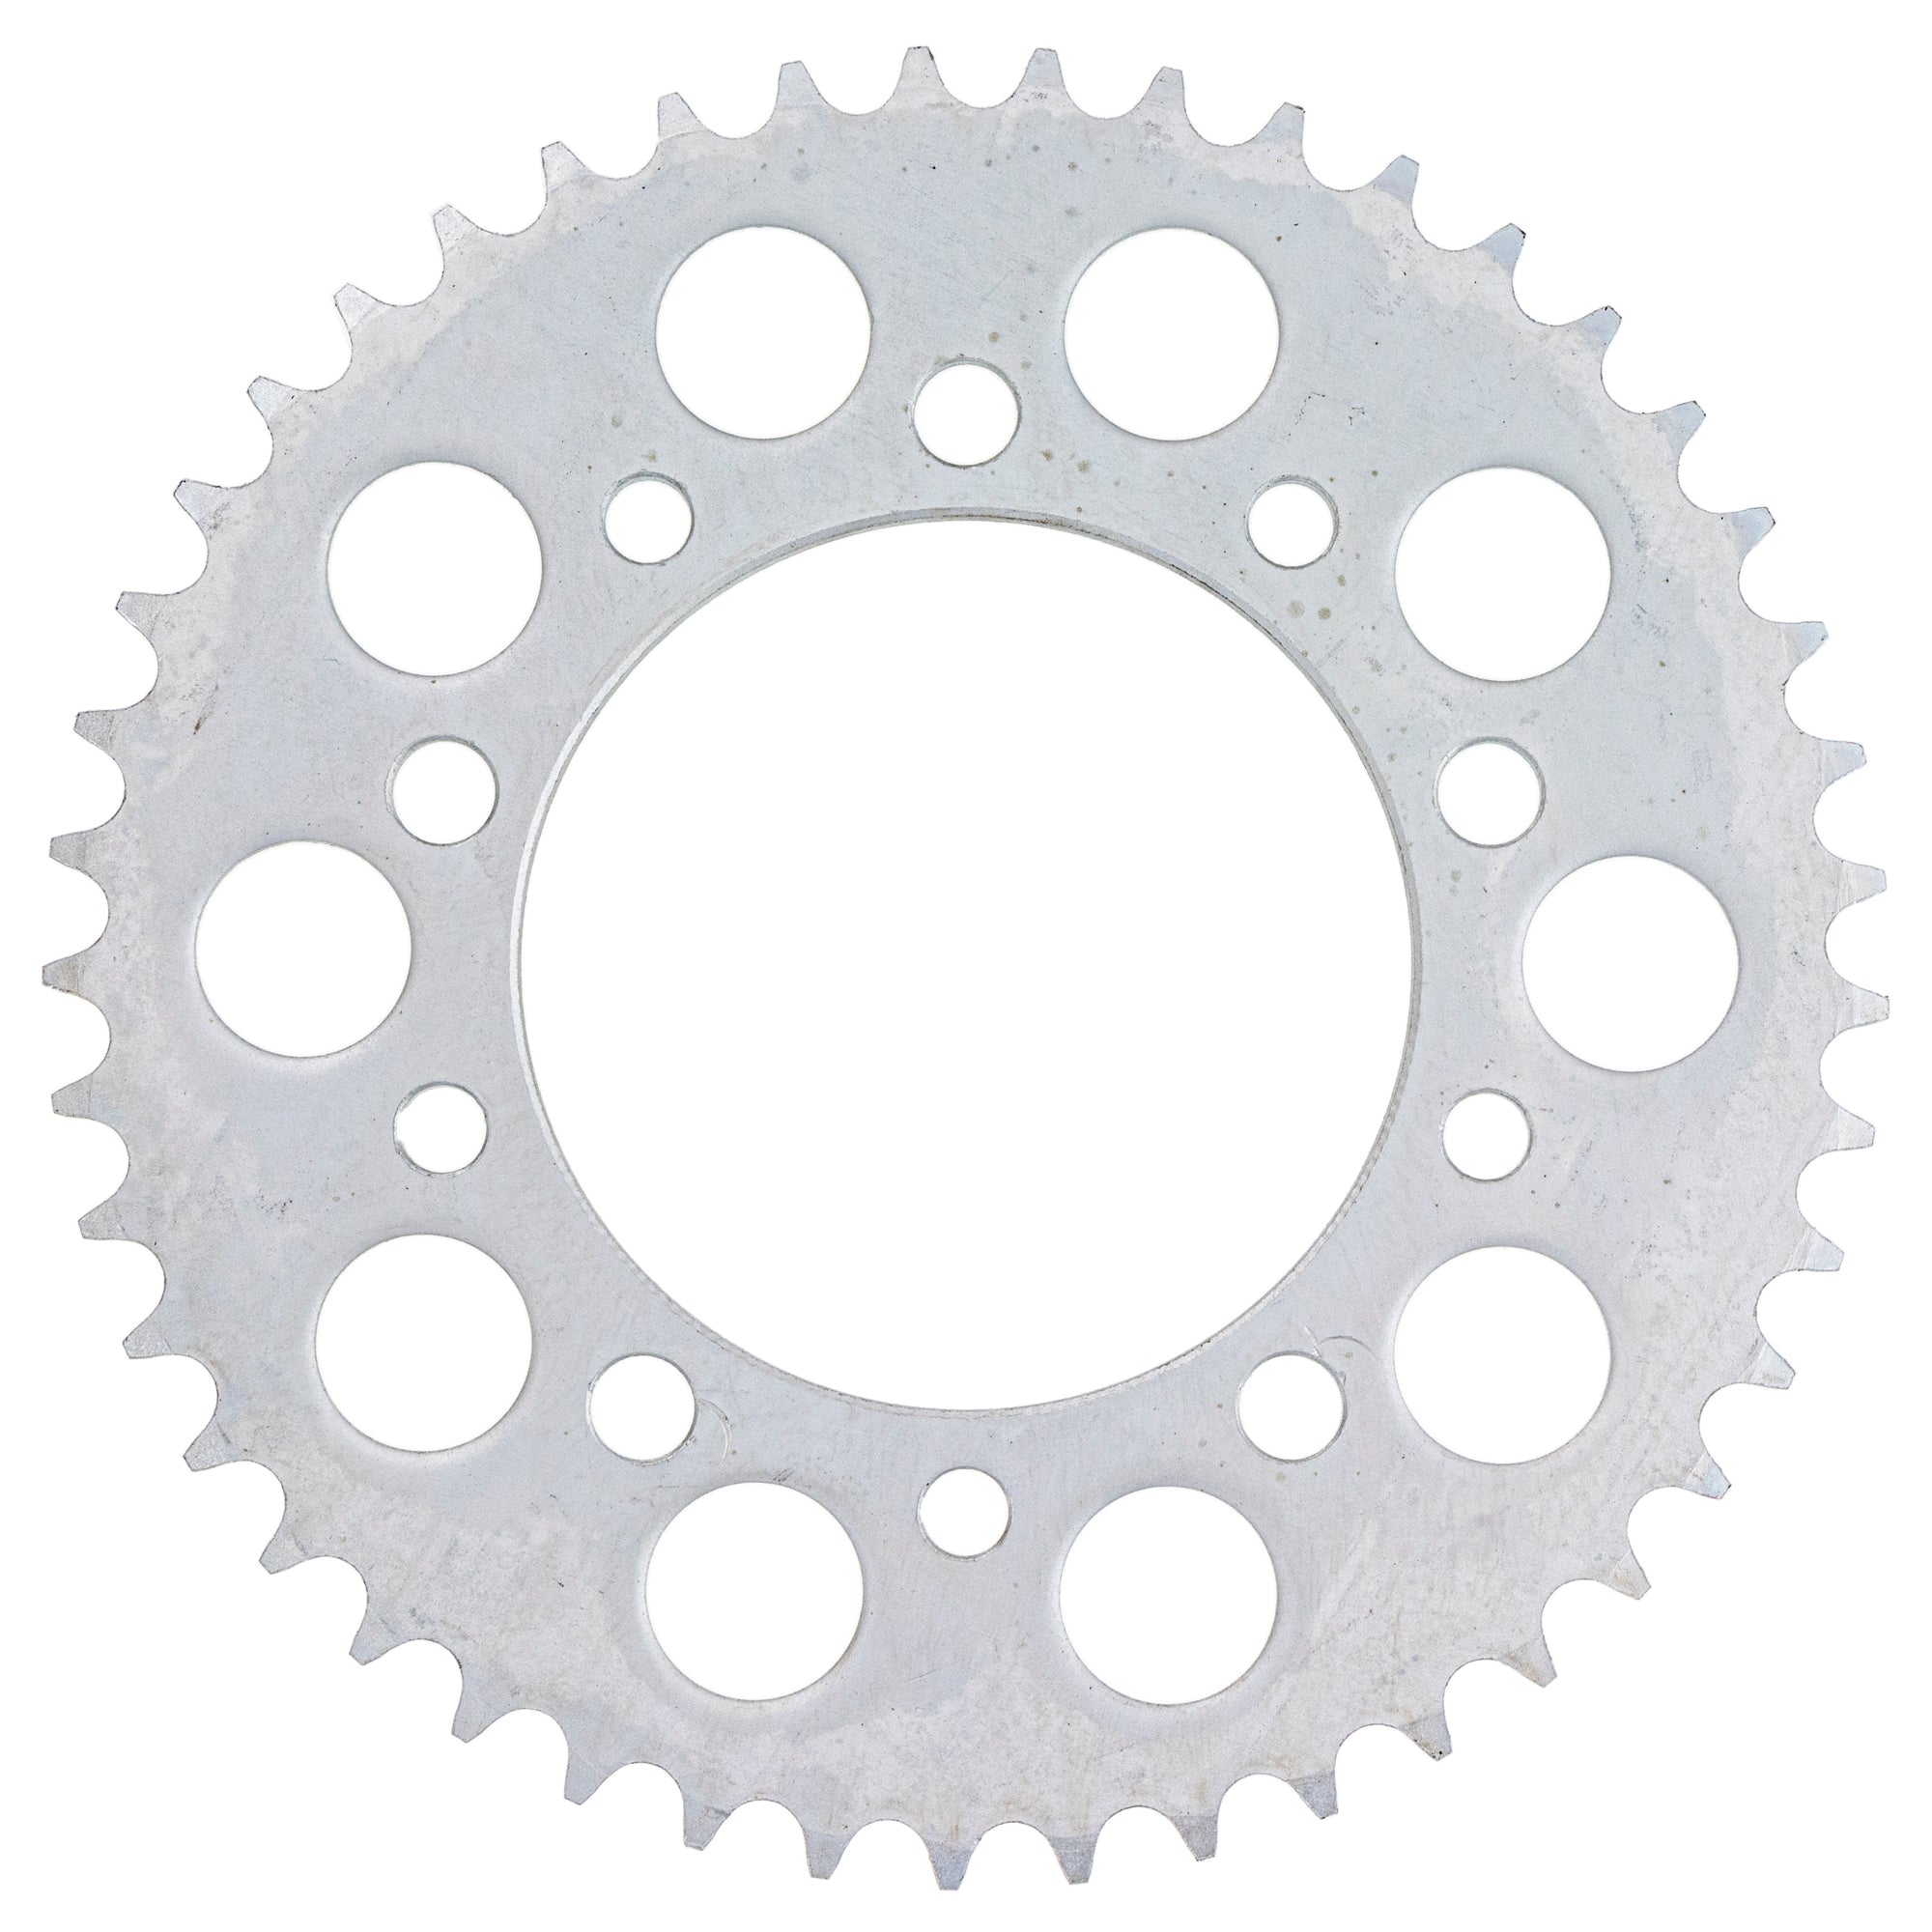 520 Pitch Front 16T Rear 45T Drive Sprocket Kit for Honda CBR600F